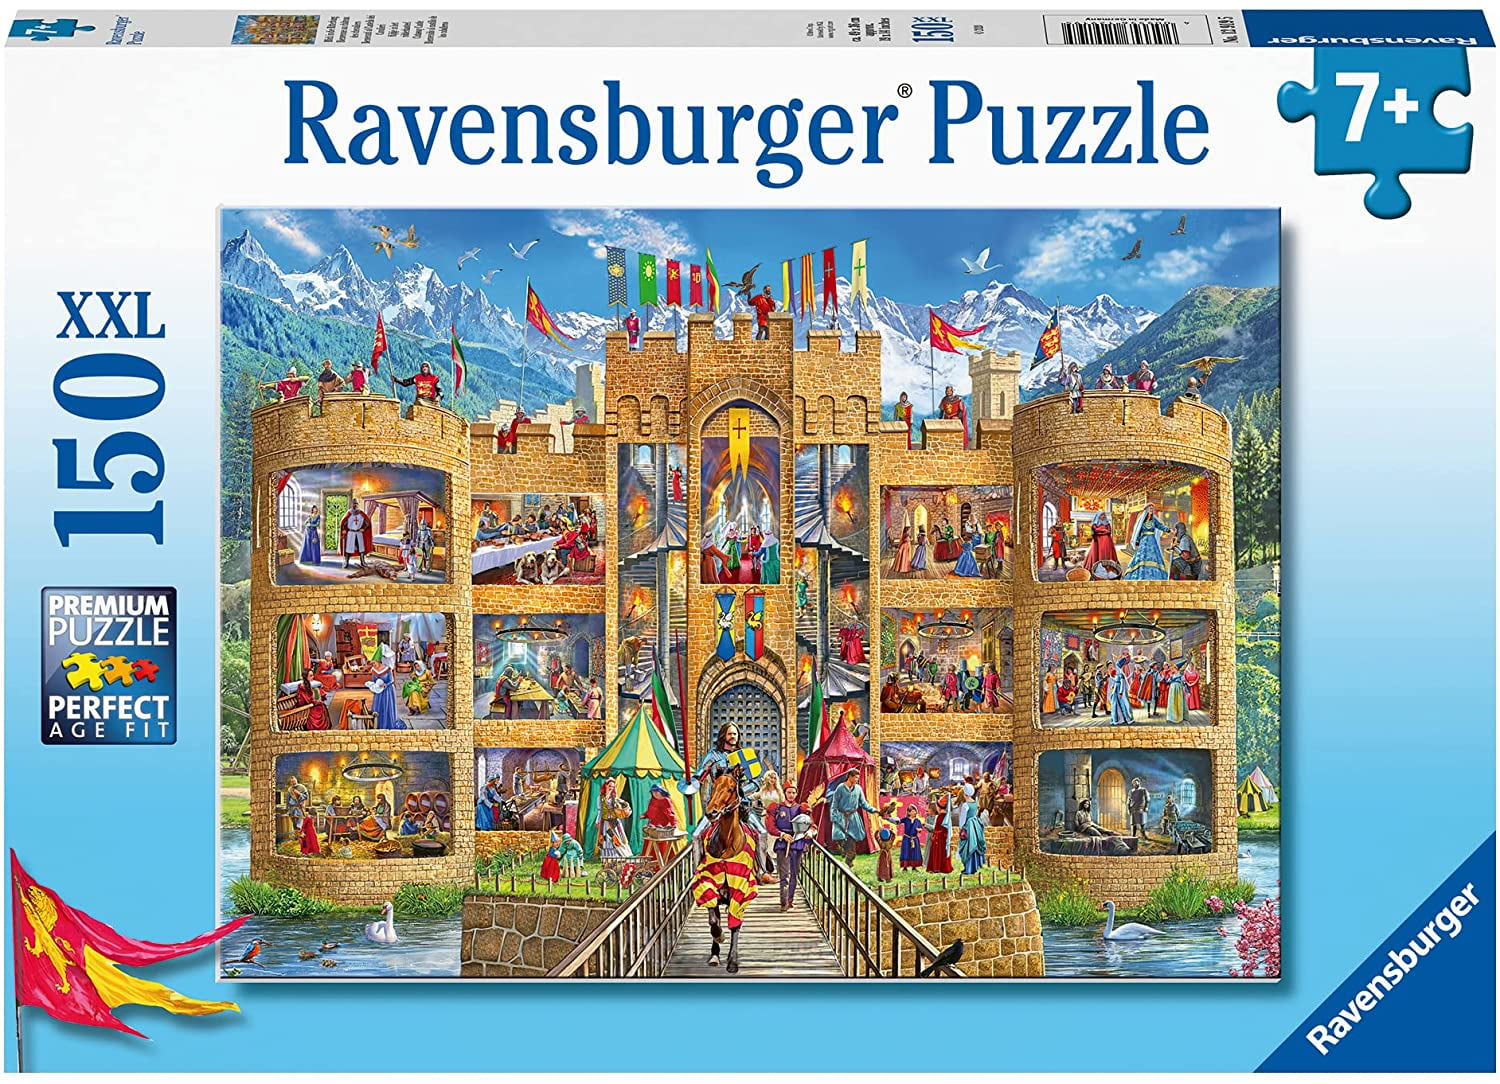 Misbruik beweging activering Ravensburger children's puzzle - 12919 view of the knight's castle -  knight's puzzle for children with 150 pieces in XXL format - Walmart.com